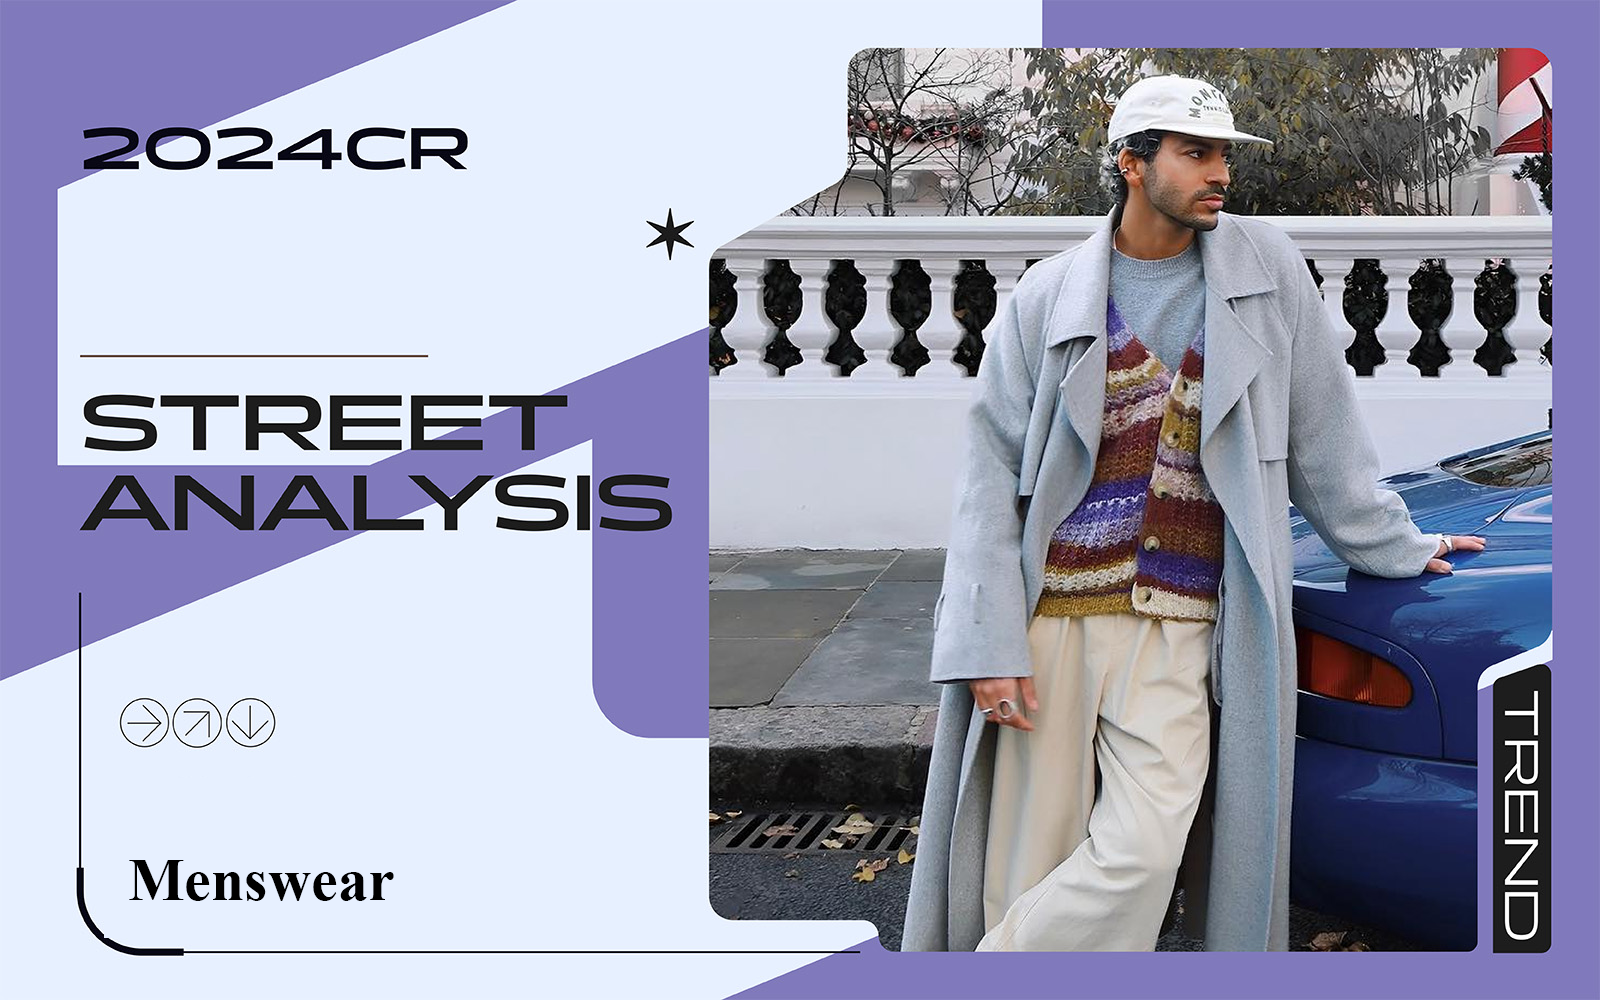 Young Commuter -- The Analysis of Men's Street Styles